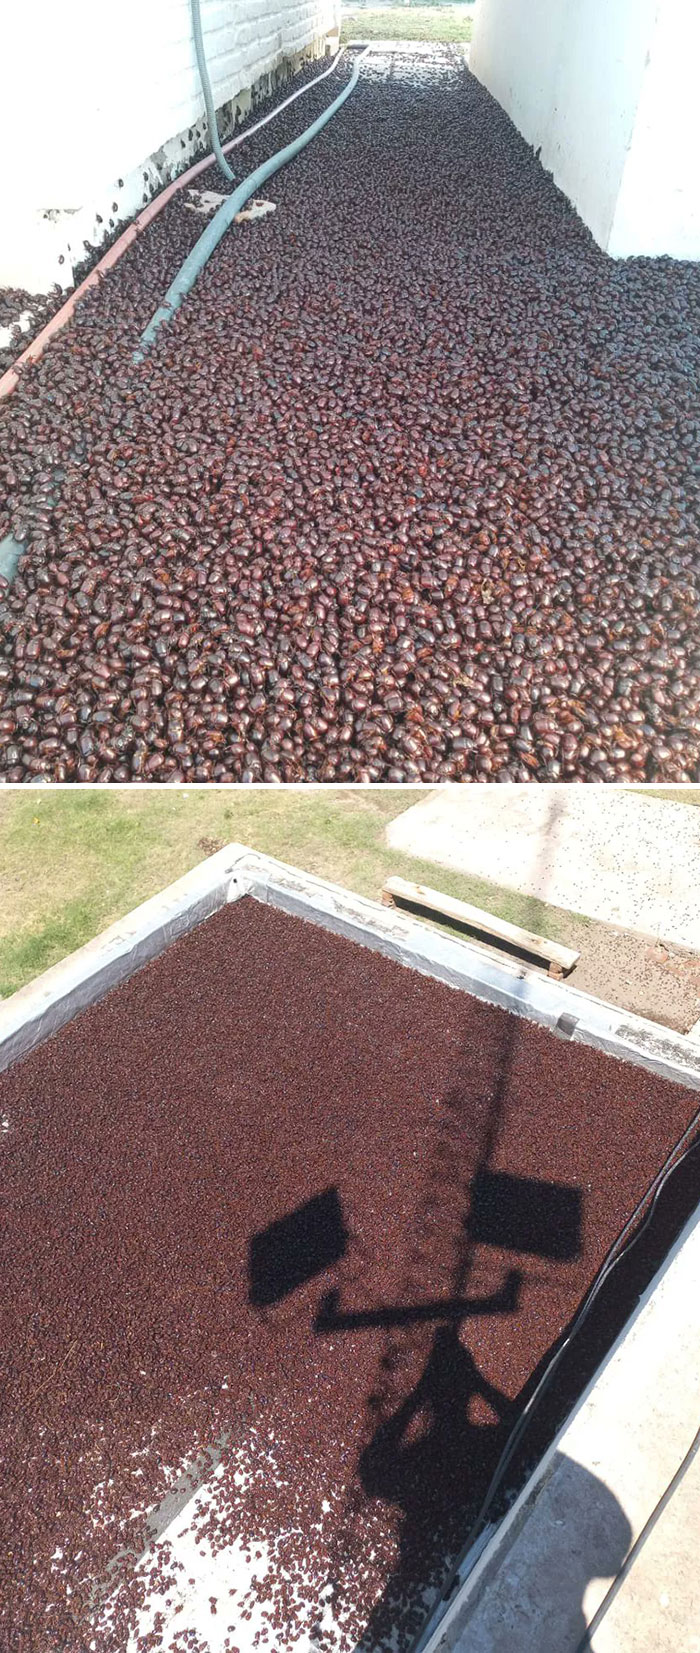 Brown Beetle Infestation In Argentina Due To Intense Heat Wave